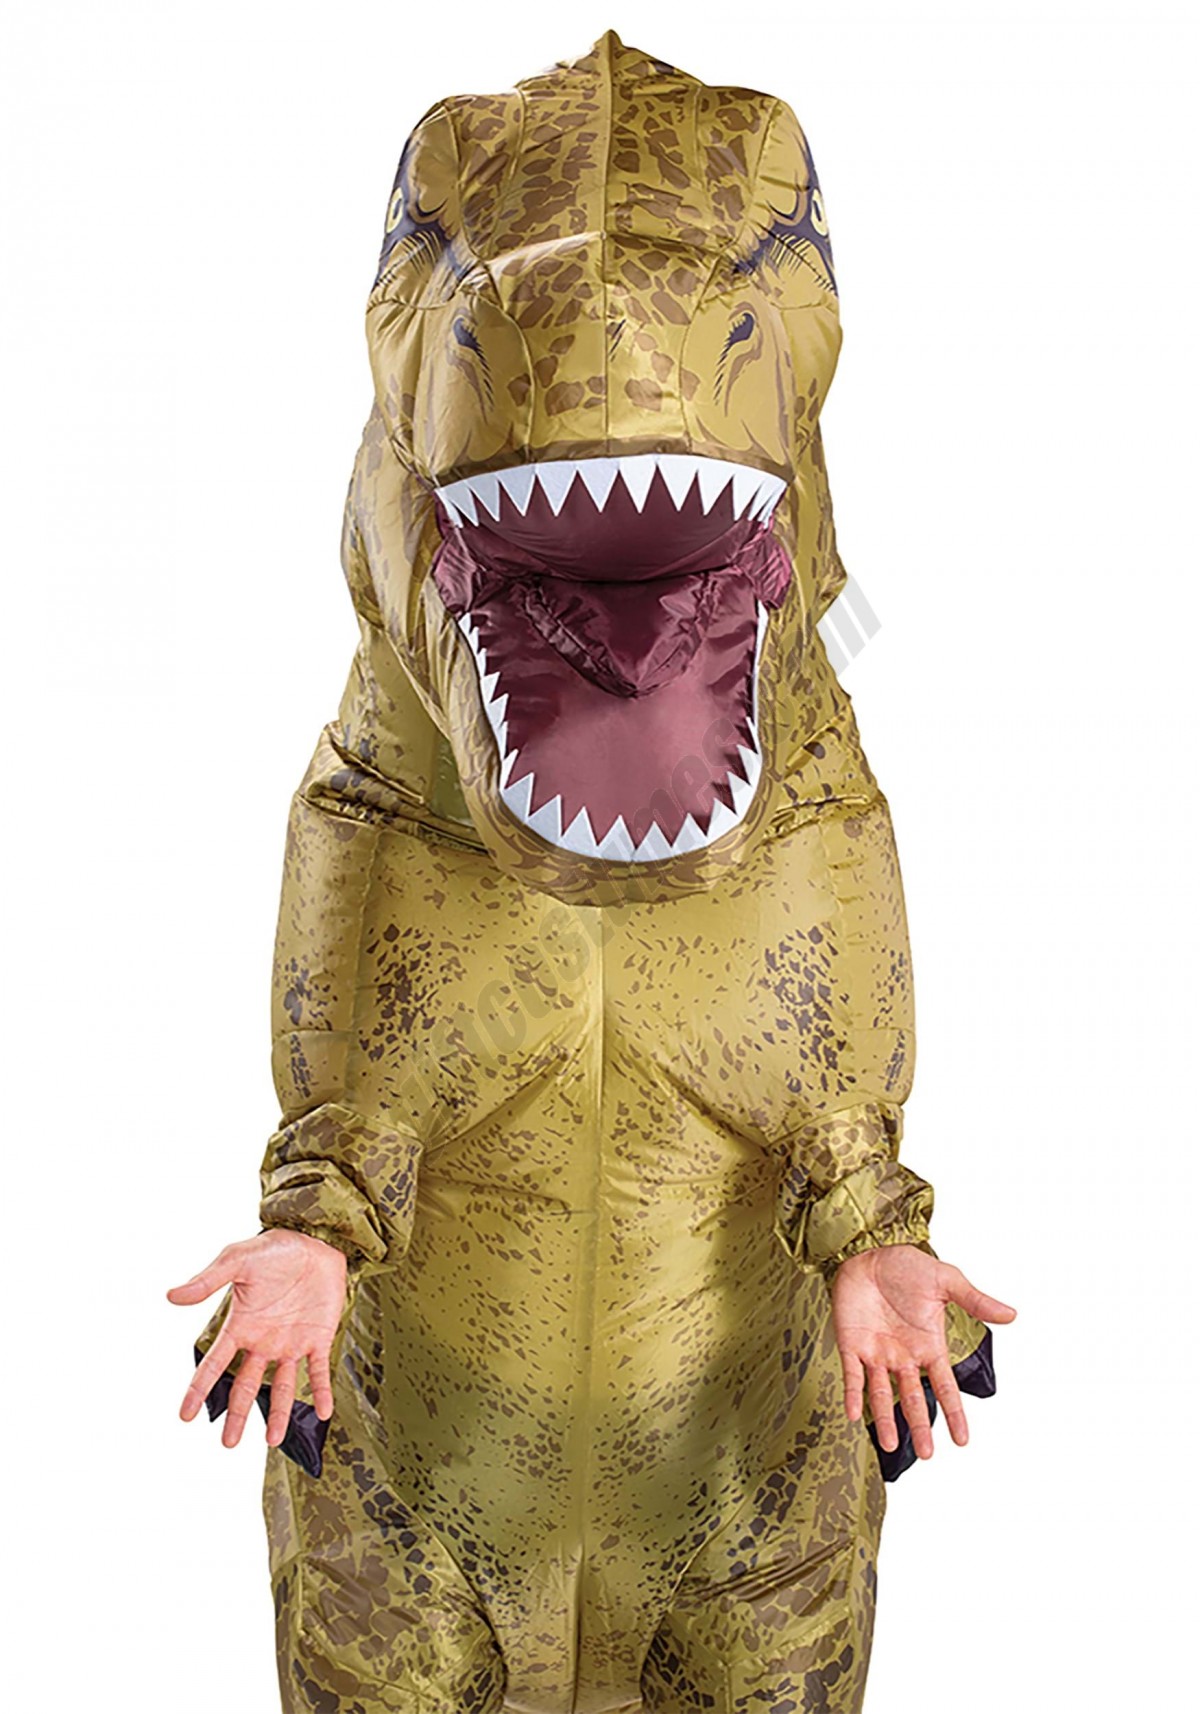 Jurassic World Inflatable T-Rex Costume for Adults - Men's - -2